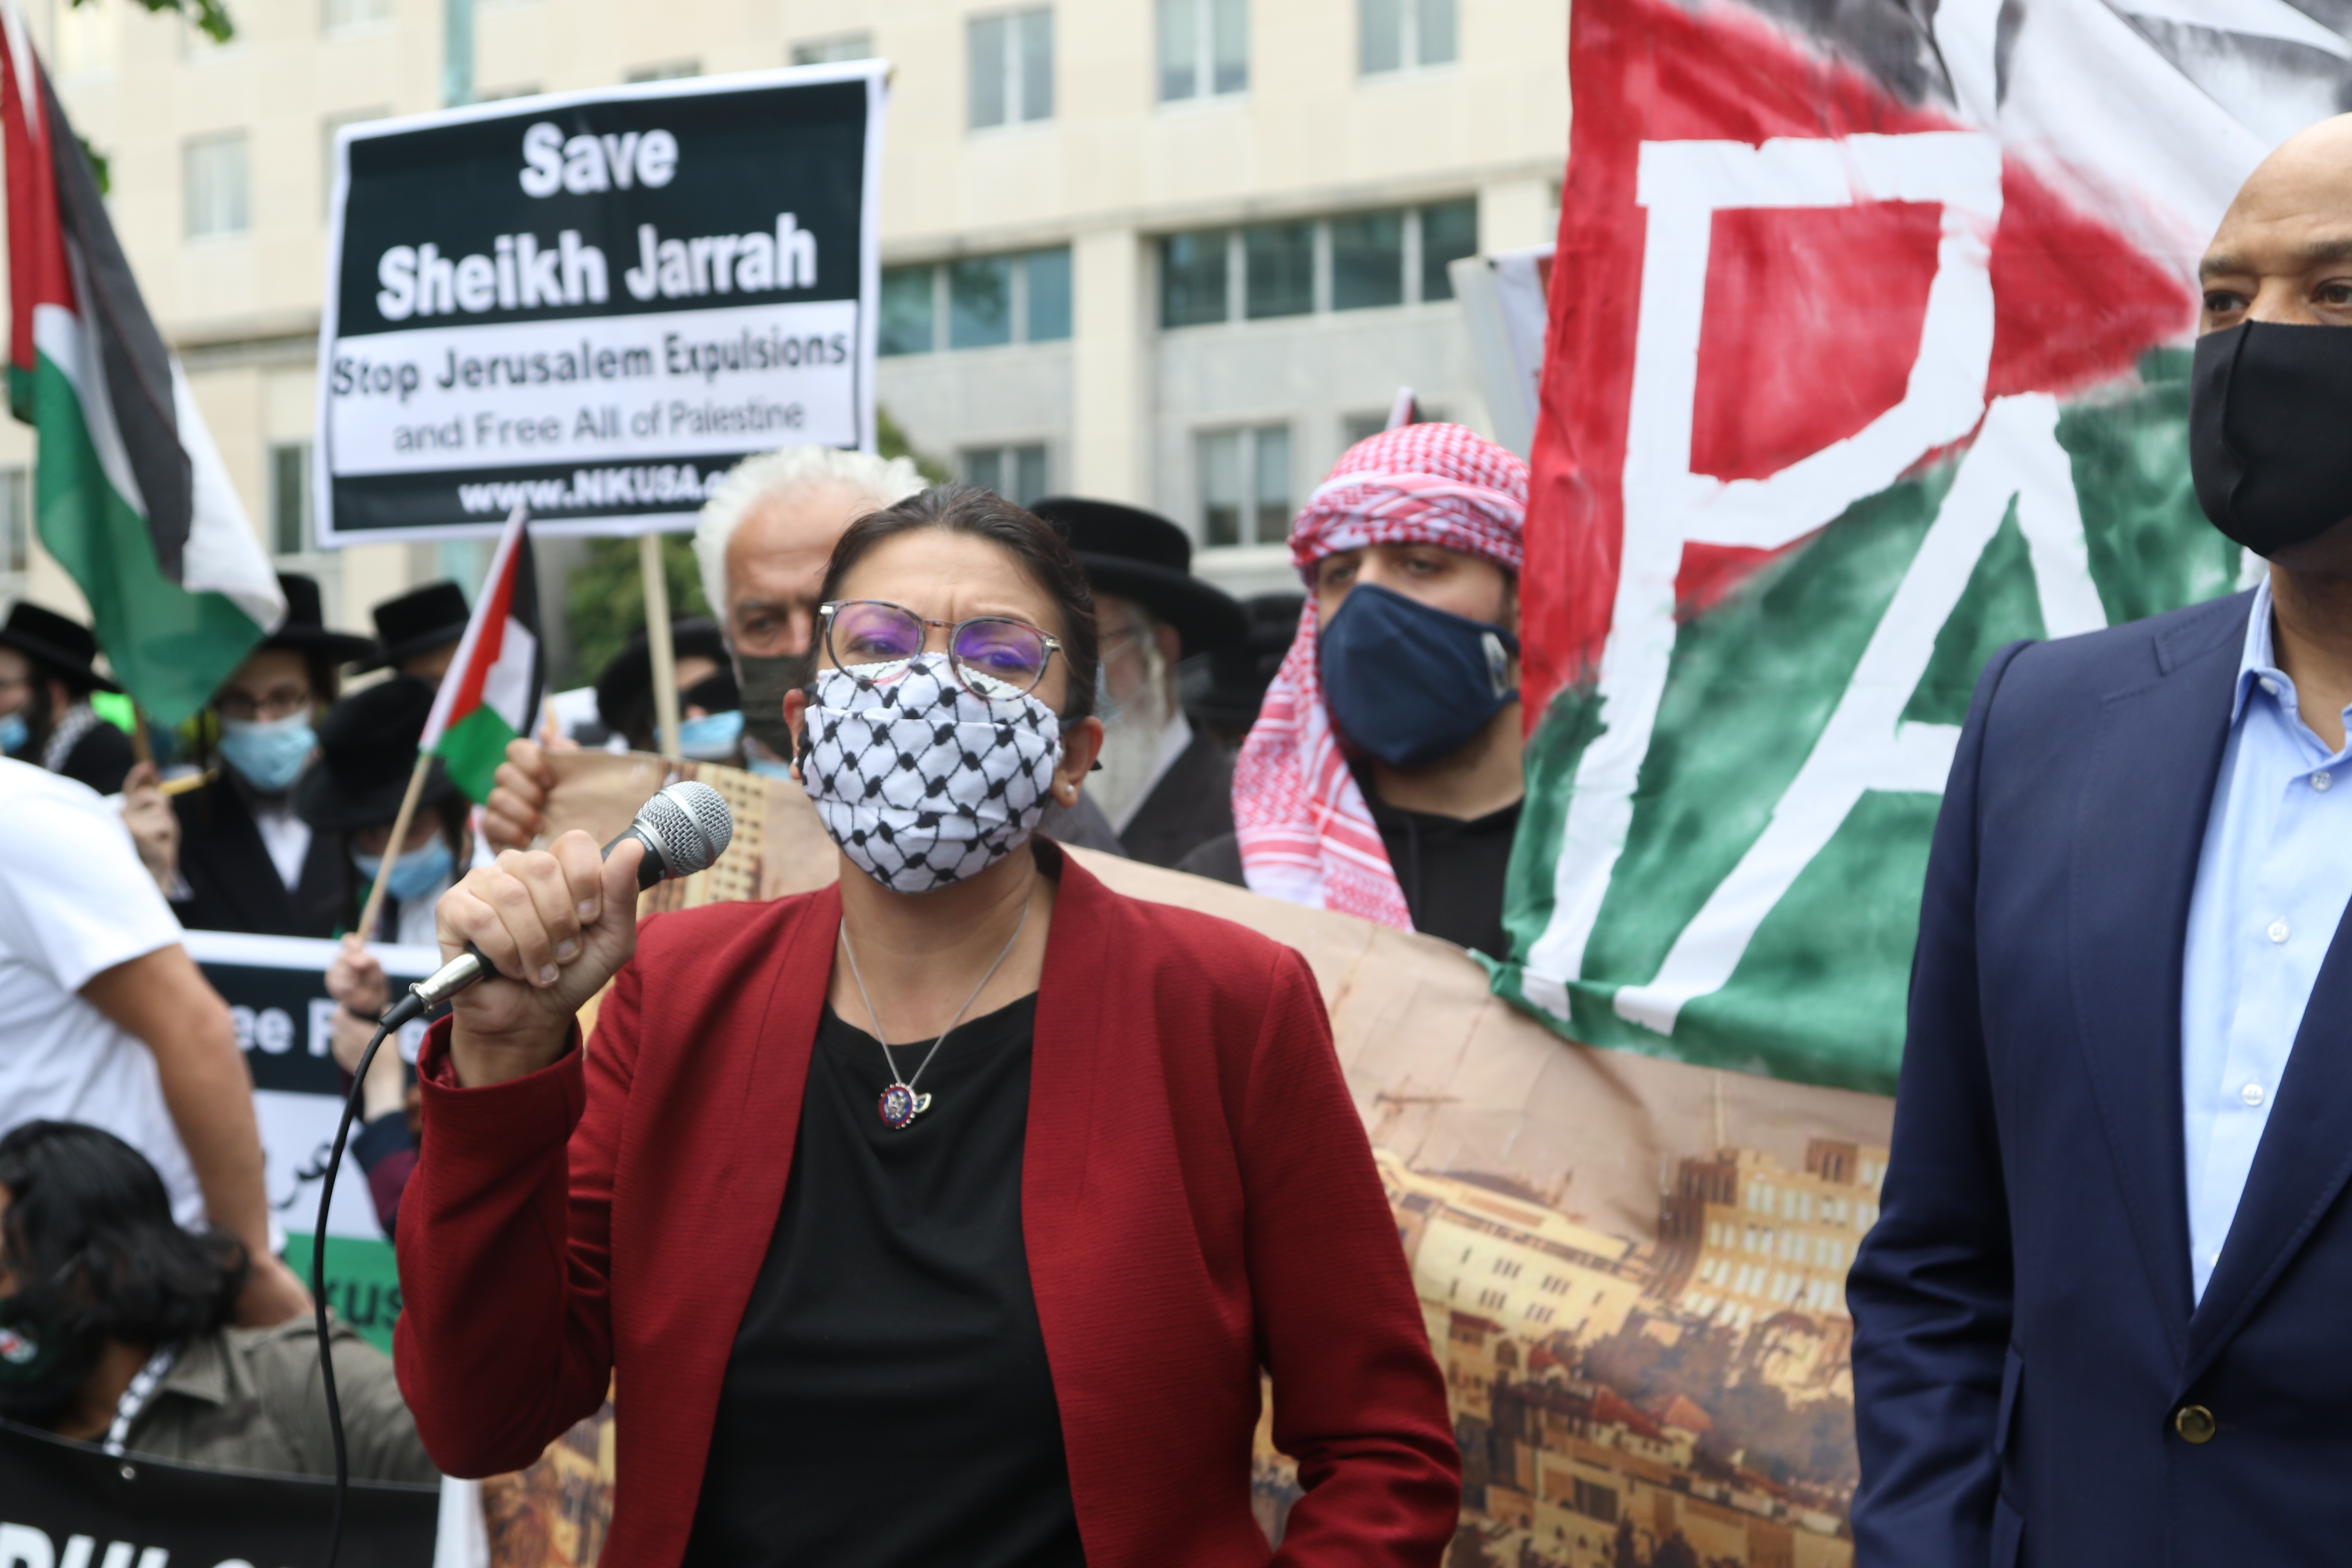 Speaking at the demonstration in Washington DC, Congresswoman Rashida Tlaib voiced her support for an end to a ban on US aid to Israel being used to fund the annexation or the demolition of Palestinian homes